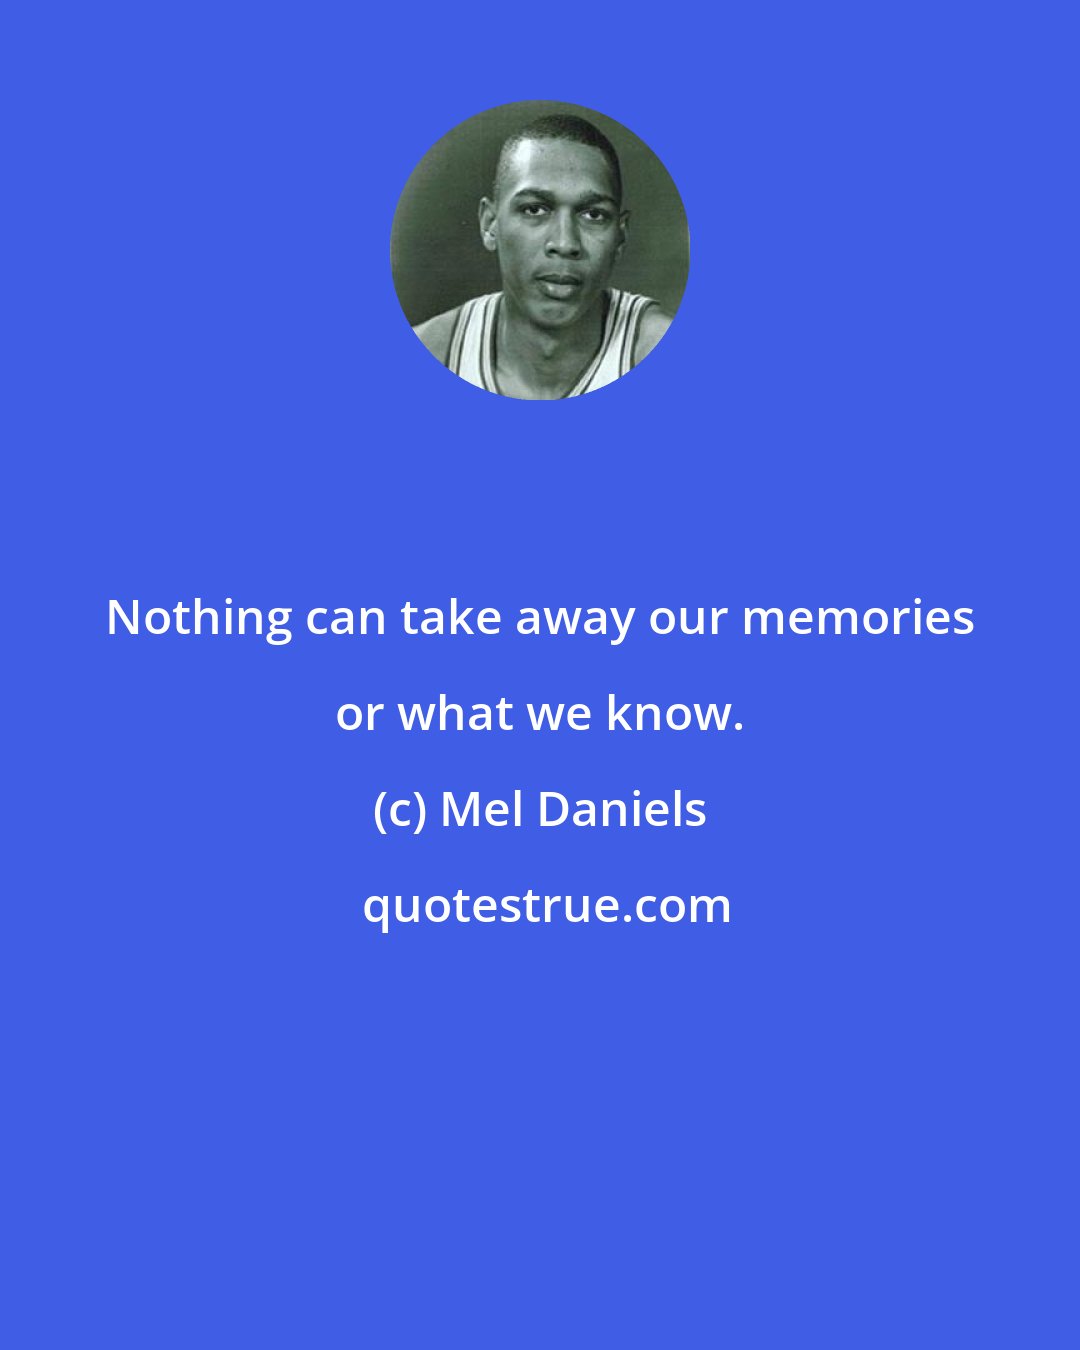 Mel Daniels: Nothing can take away our memories or what we know.